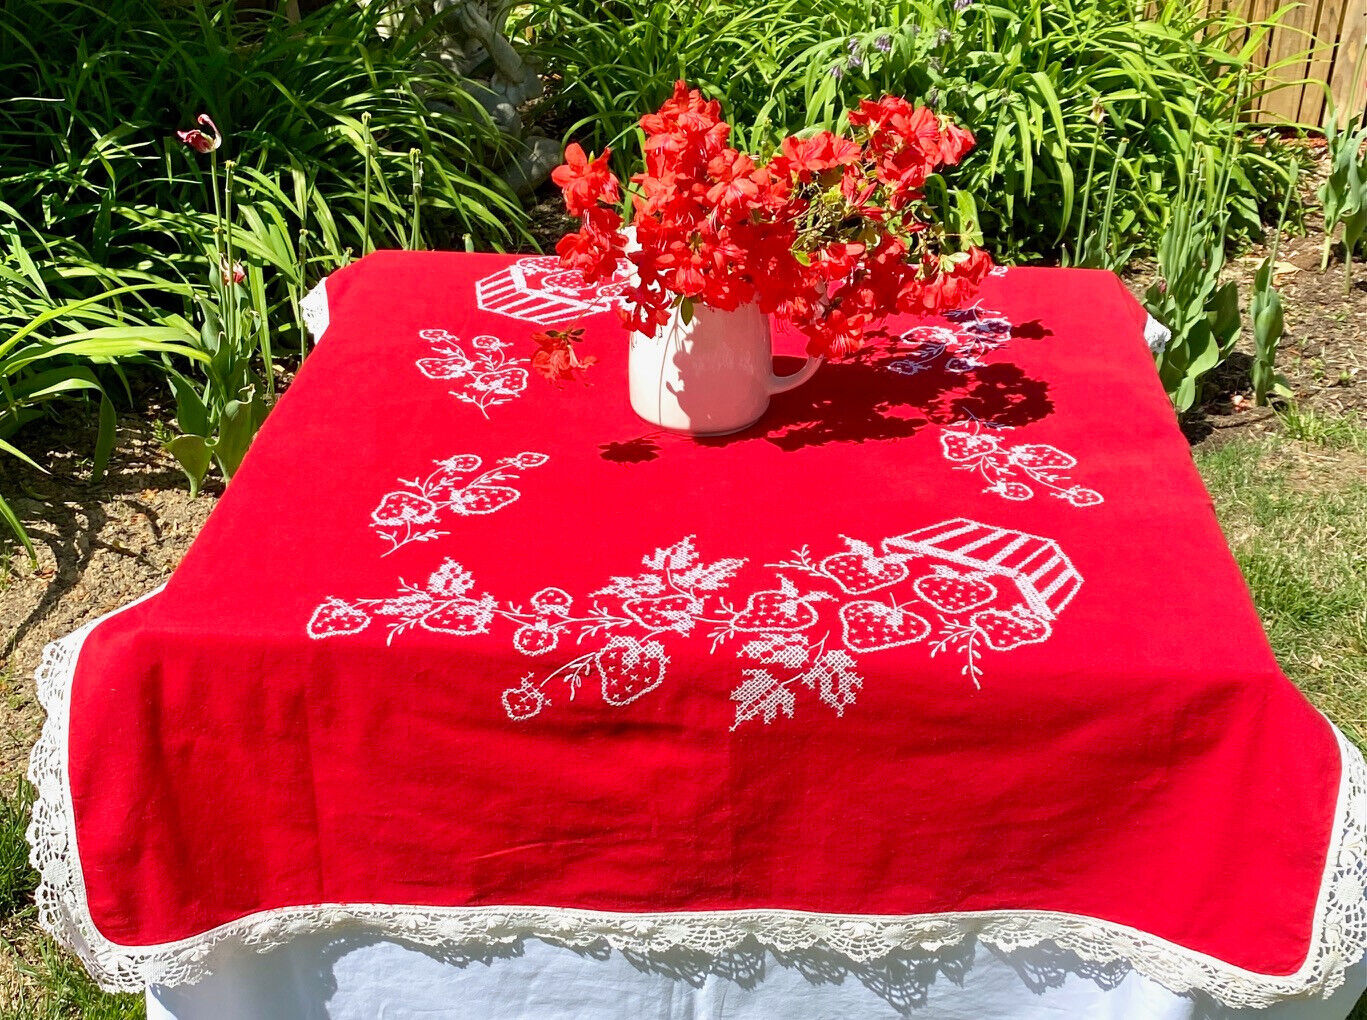 SWEET Vintage Handmade Strawberry Embroidered Tablecloth w/Lace Trim Handmade 